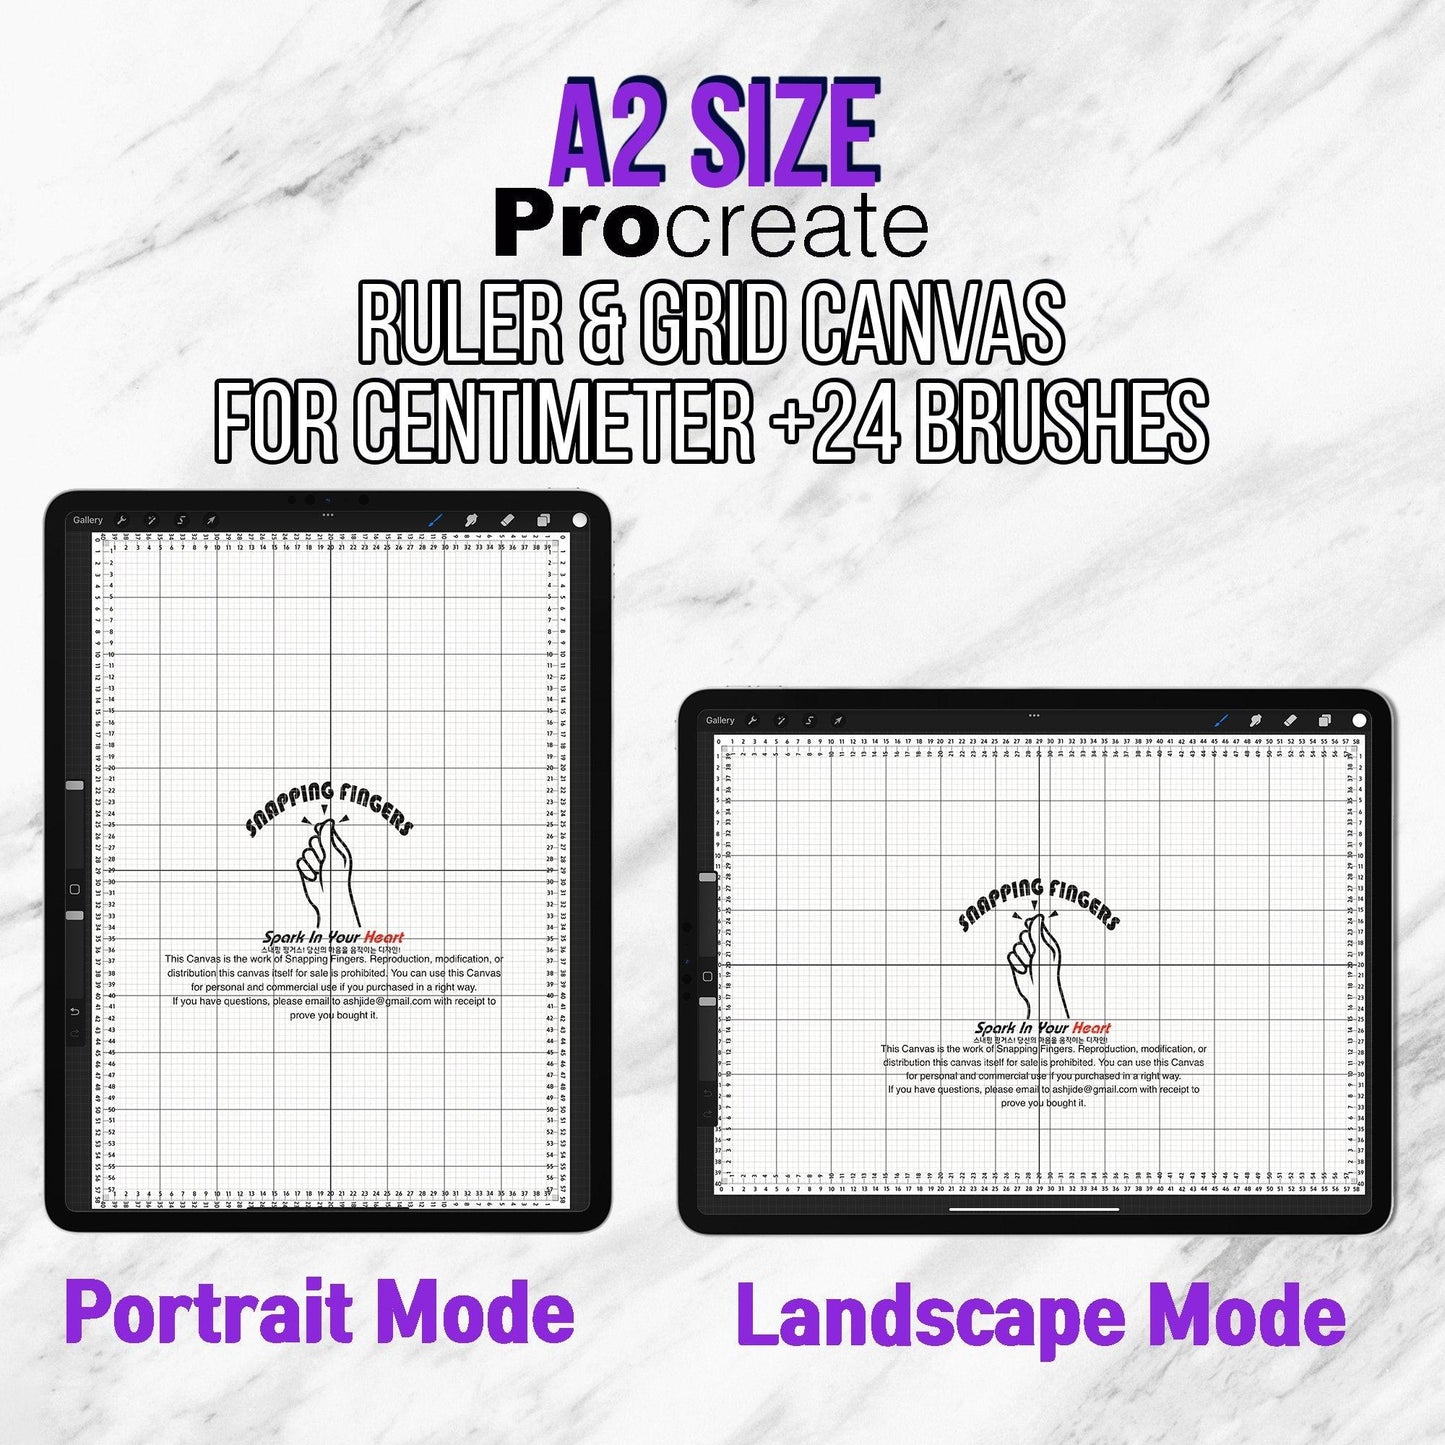 A2 Size Procreate Ruler & Grid Canvas | in Centimeters with 24 High-Quality Brushes for Professional Illustration and Design - snappingfingers_shop